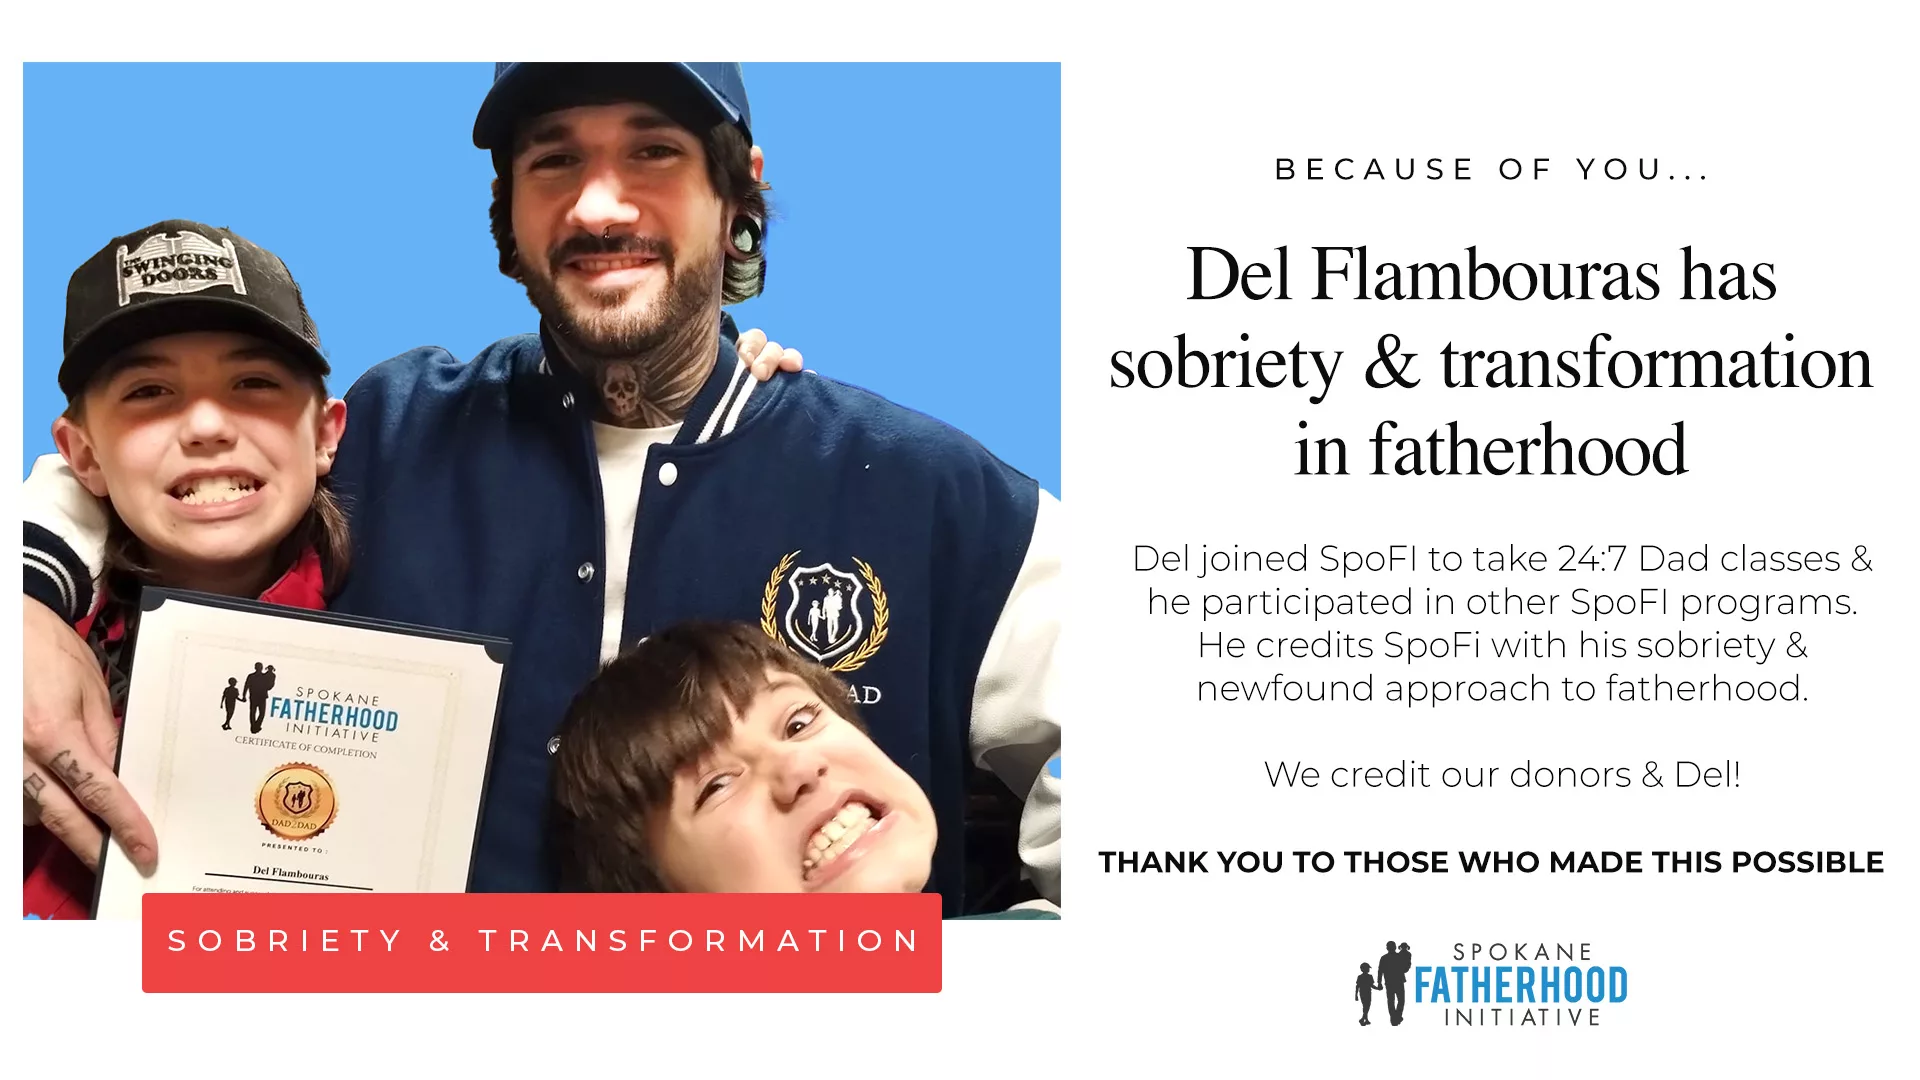 Because of you…Del Flambouras has his sobriety and transformation in his approach to fatherhood